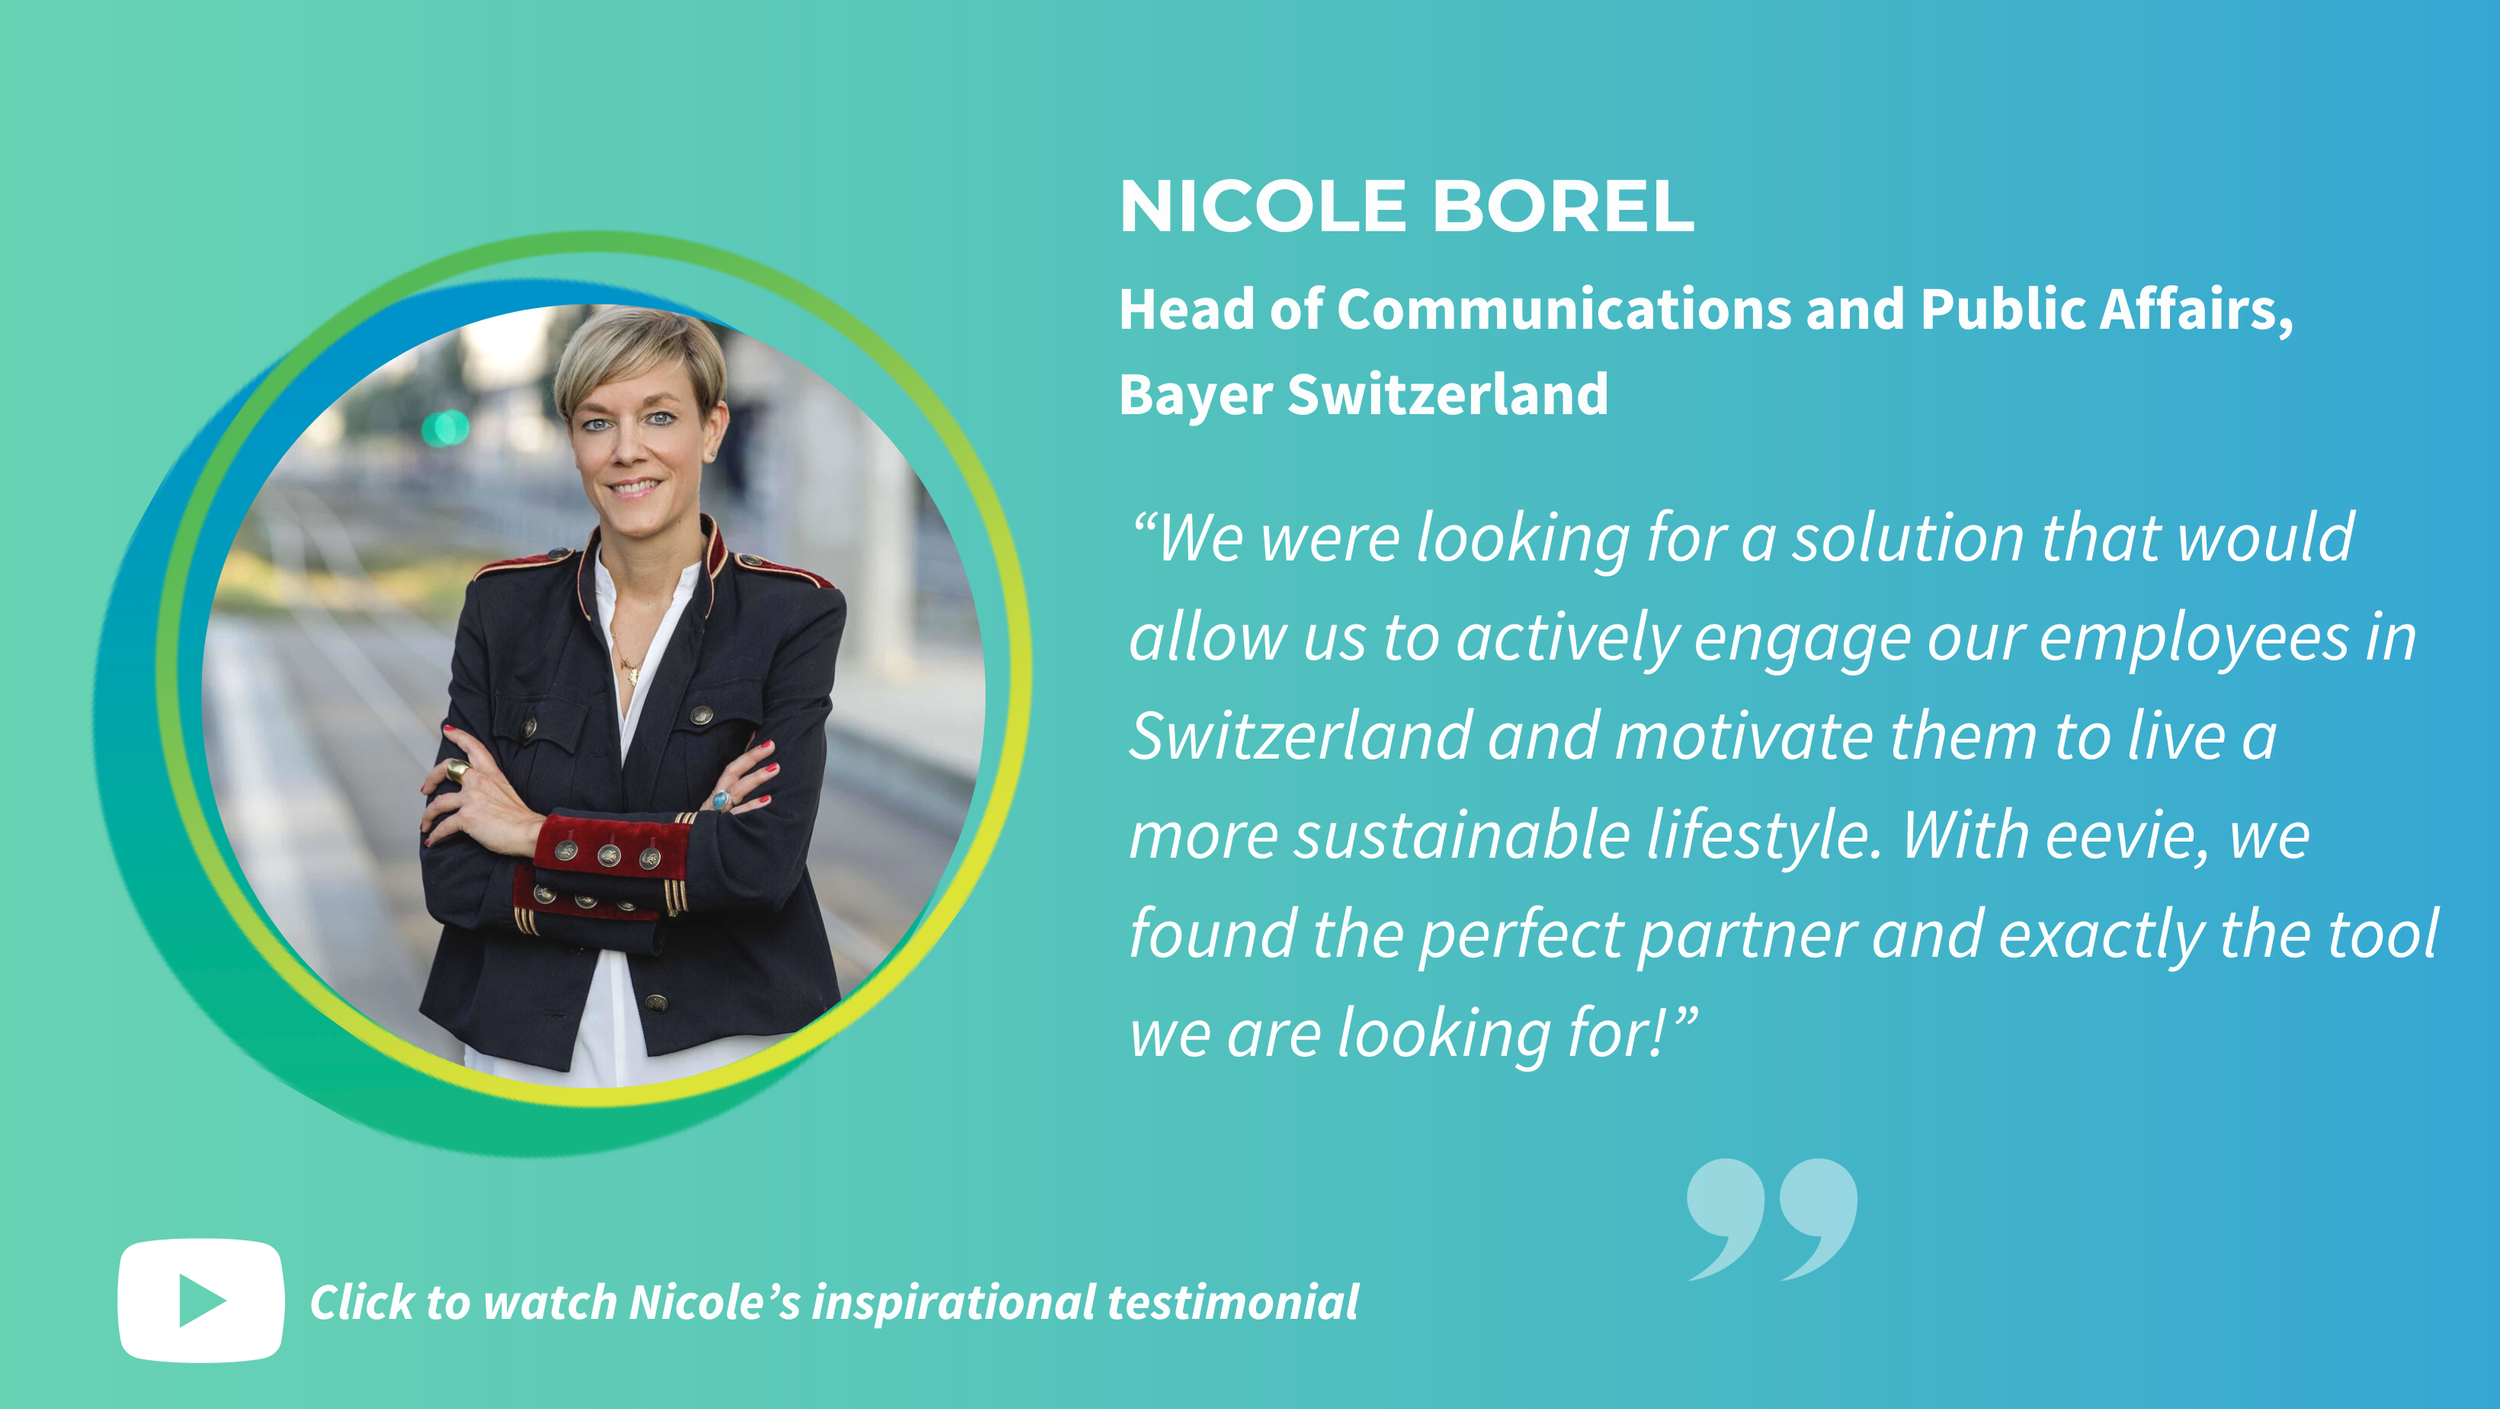 Nicole Borel is Head of Communications and Public Affairs at Bayer Switzerland